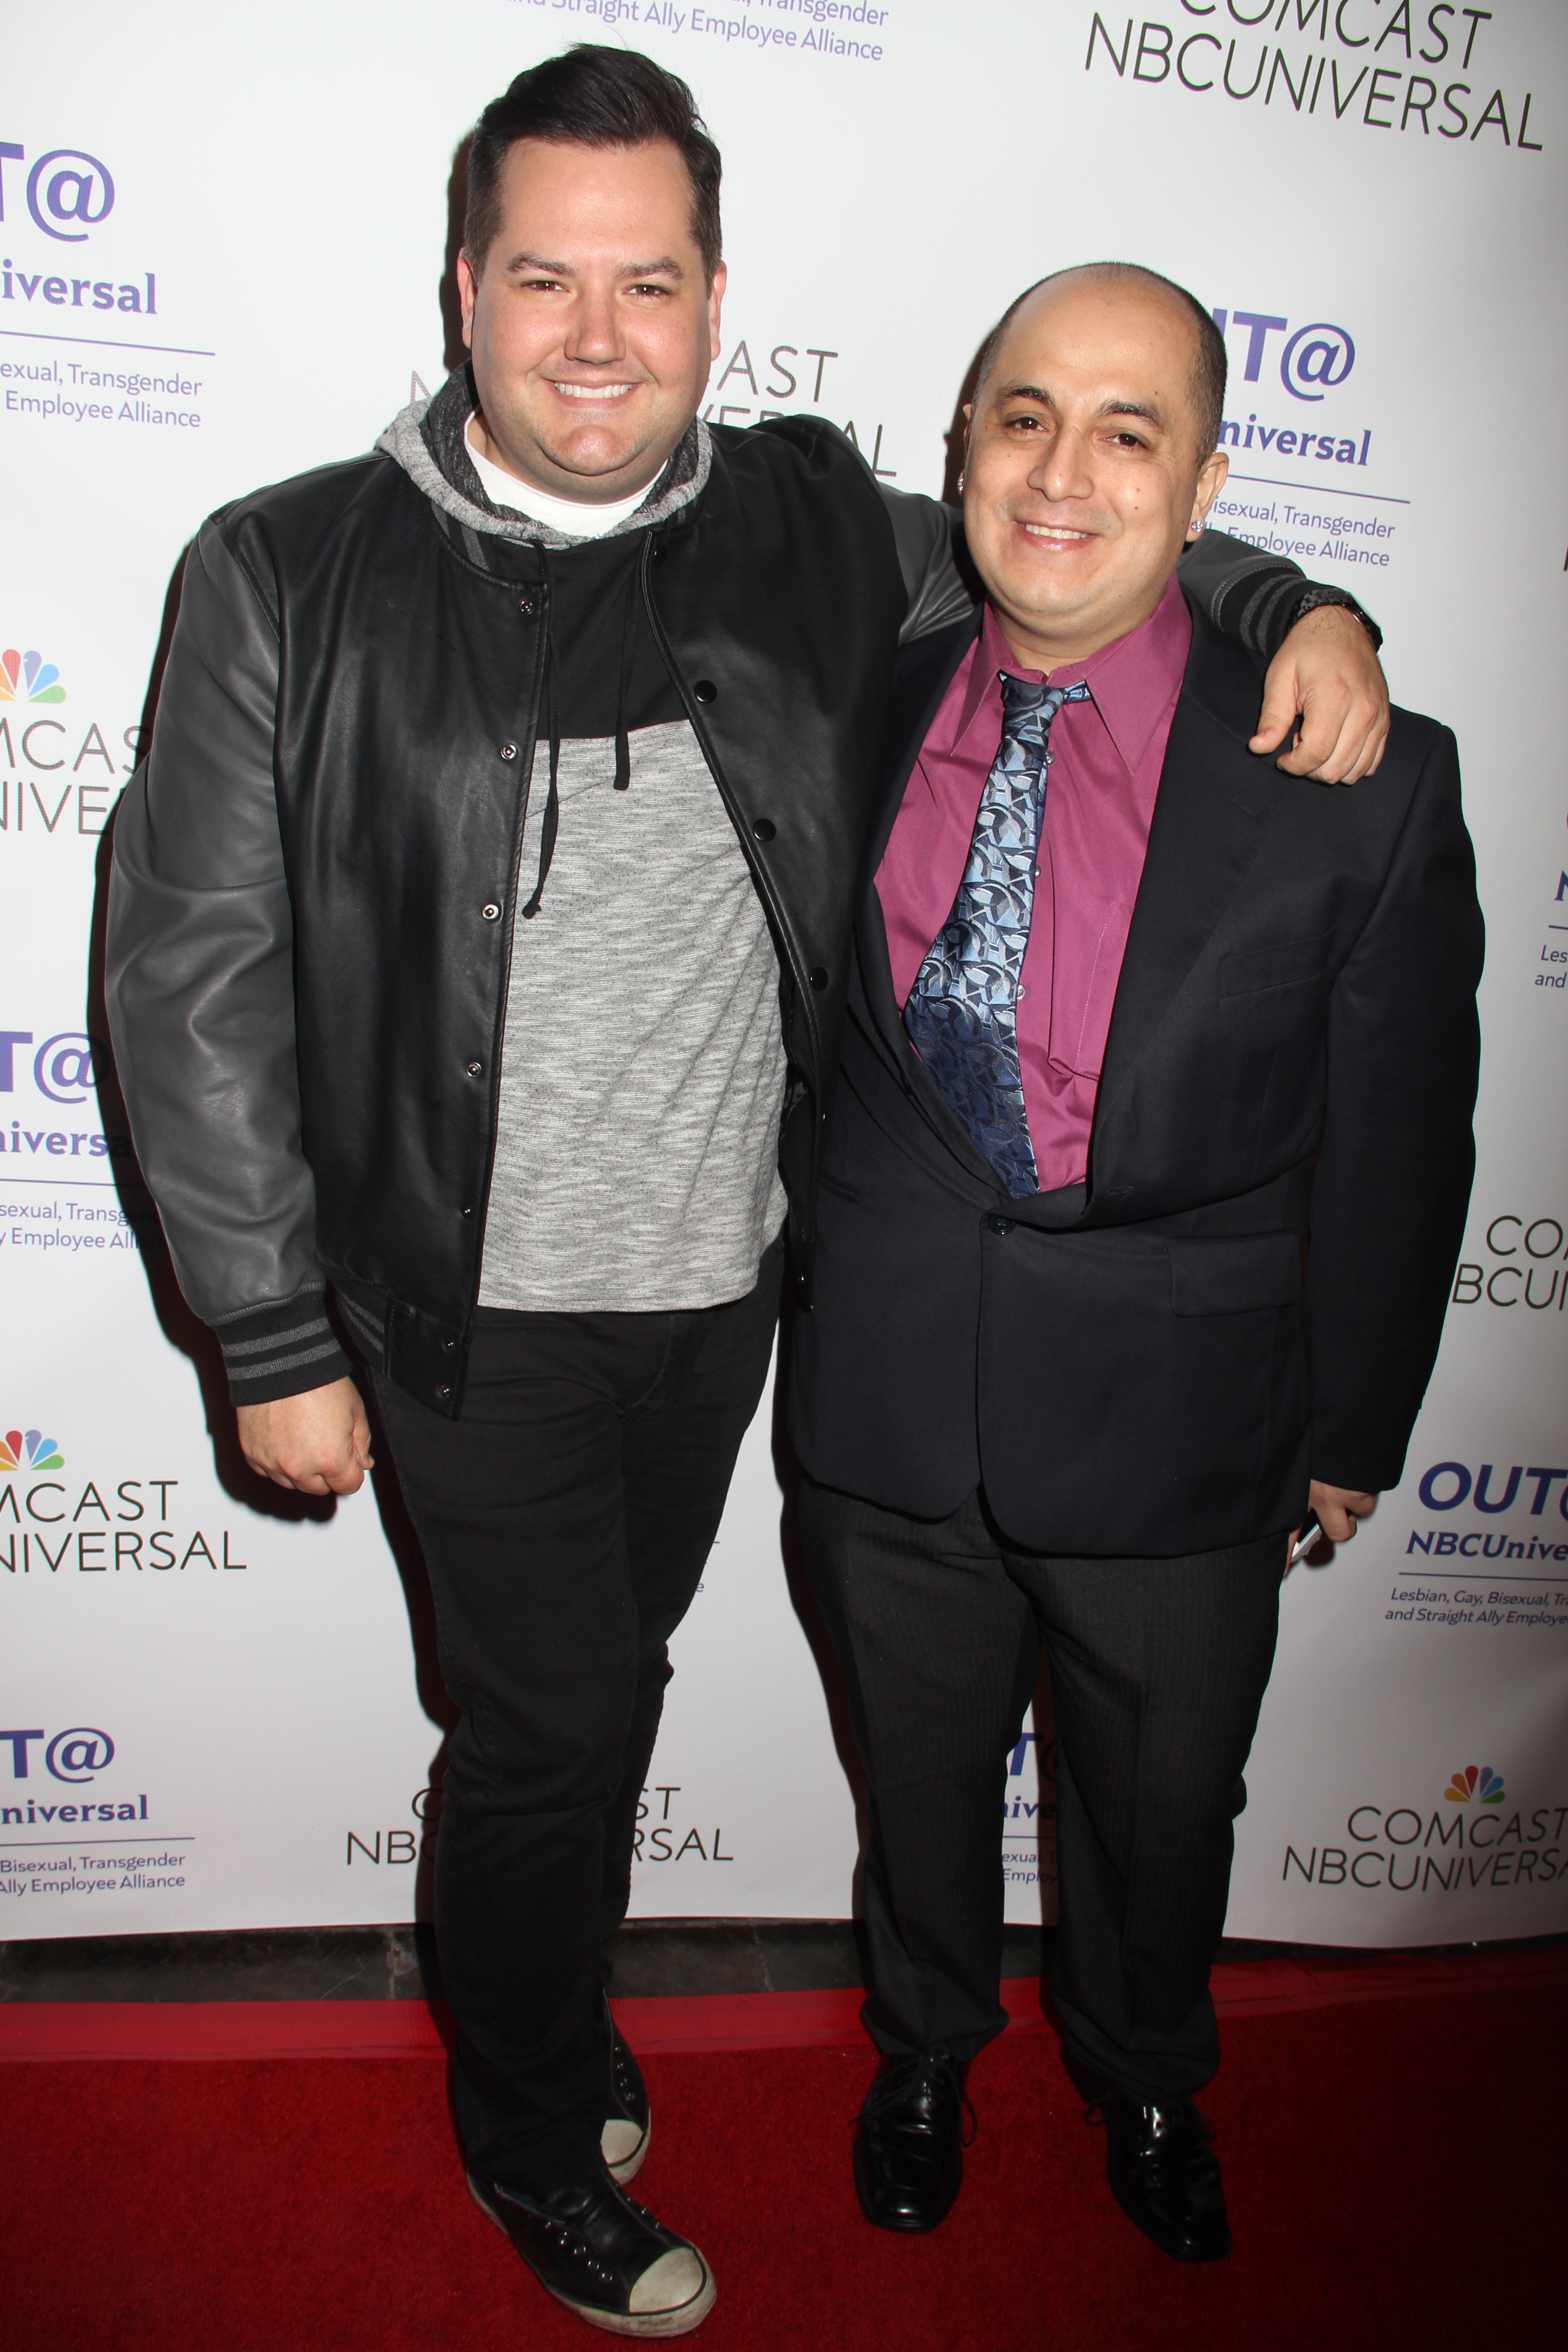 (R - L): Steven Escobar (President & Executive Editor-In-Chief of Diversity News Magazine) and Ross Mathews (Live from E!.) Arrives at OUT@NBCUniversal SoCal 10Year Anniversary at The Abbey in West Hollywood on 2-24-2015.